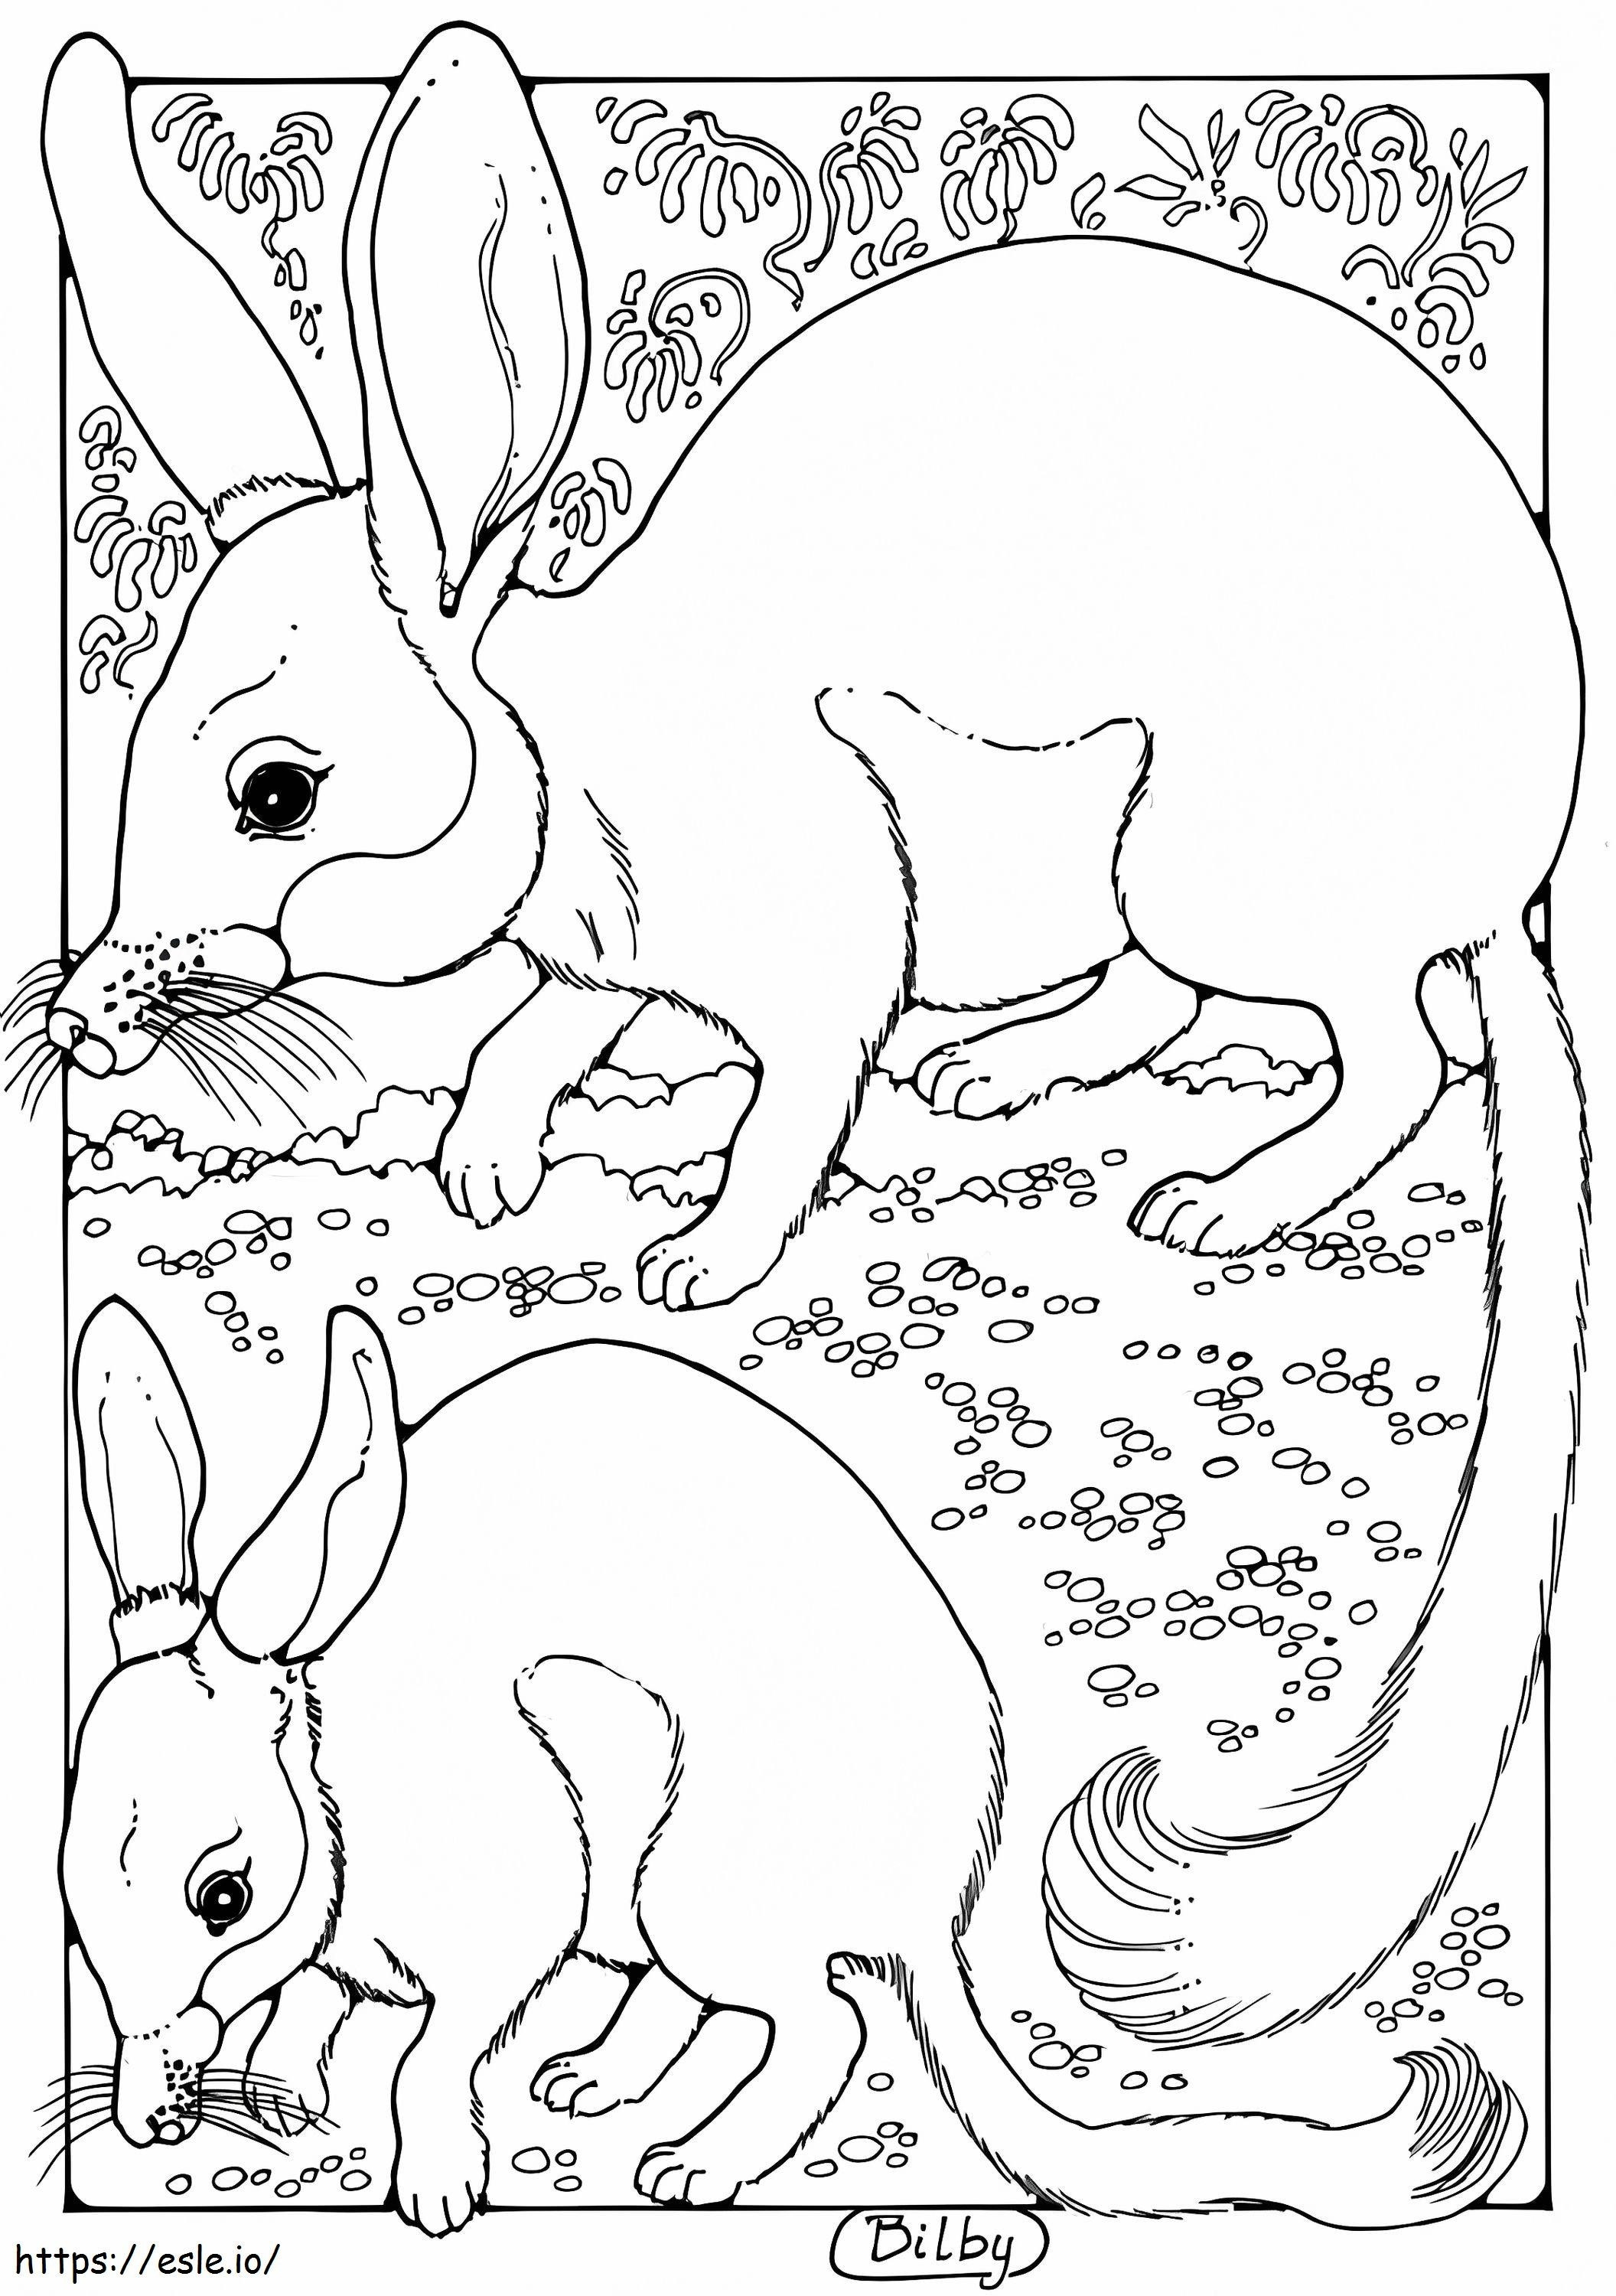 Two Bilby coloring page